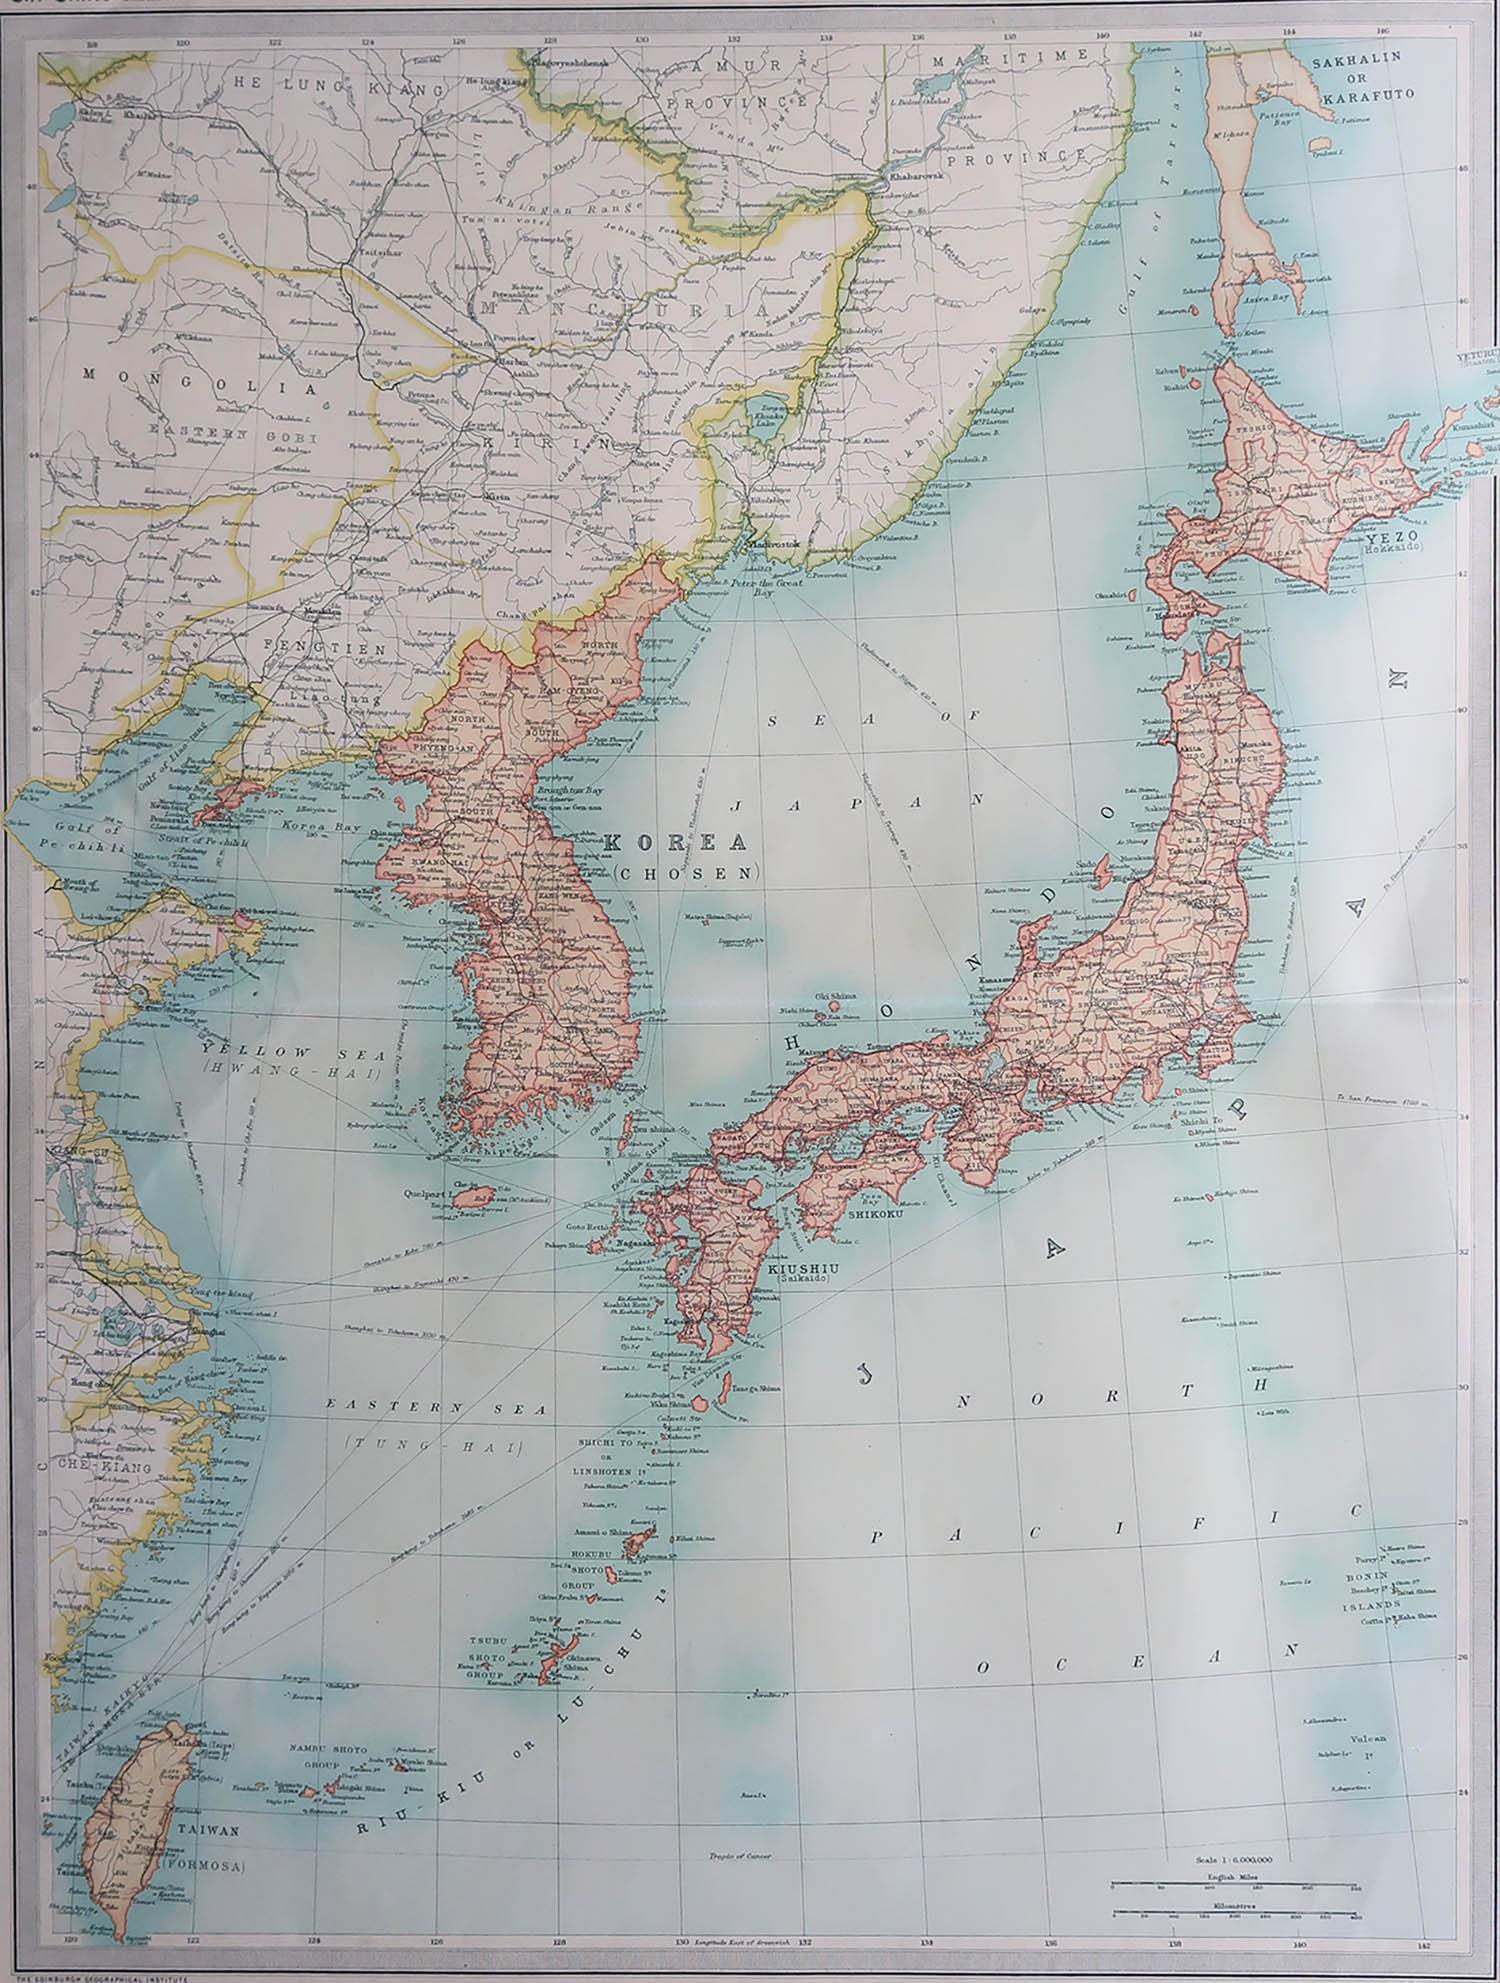 Great map of Japan

Unframed

Original color

By John Bartholomew and Co. Edinburgh Geographical Institute

Published, circa 1920

Free shipping.
 